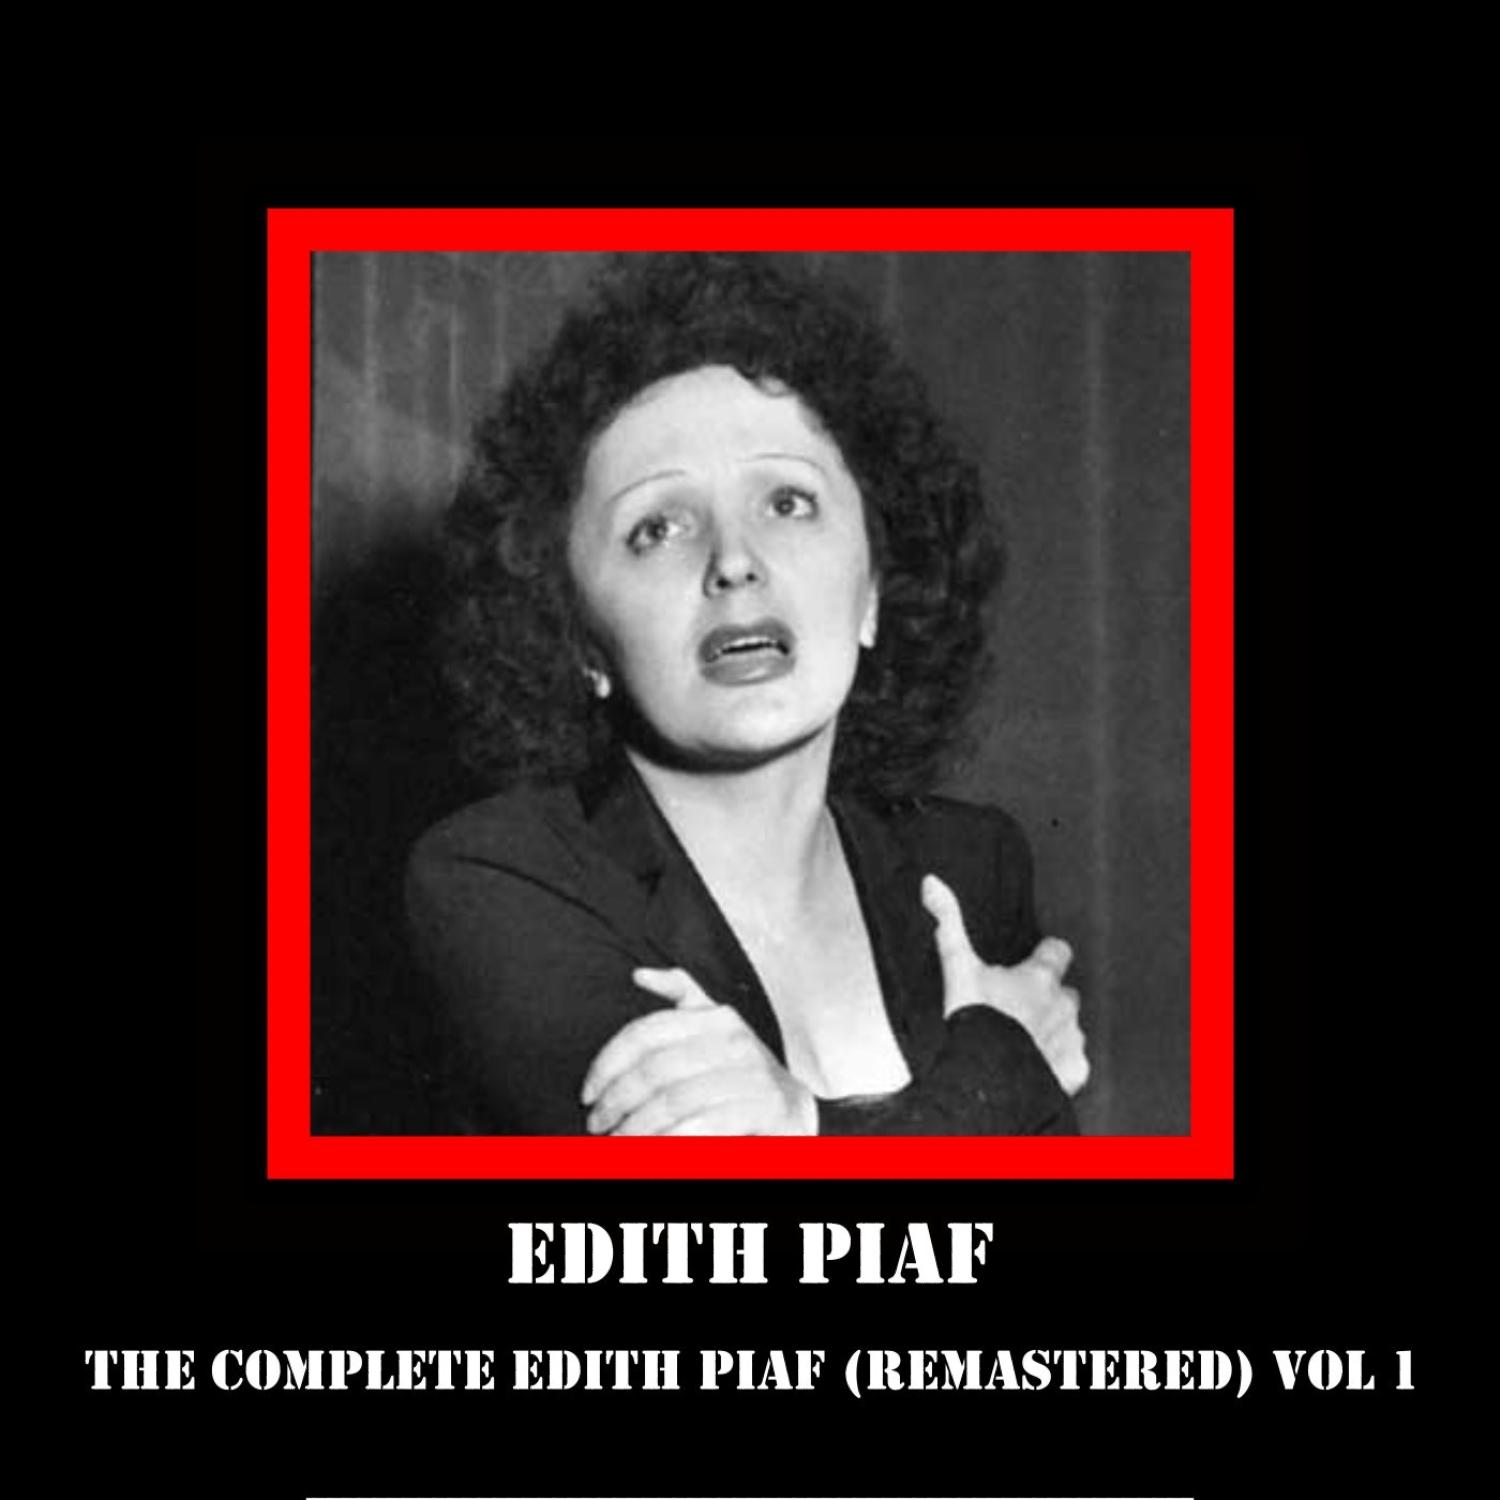 The Complete Edith Piaf (Remastered) Vol 1